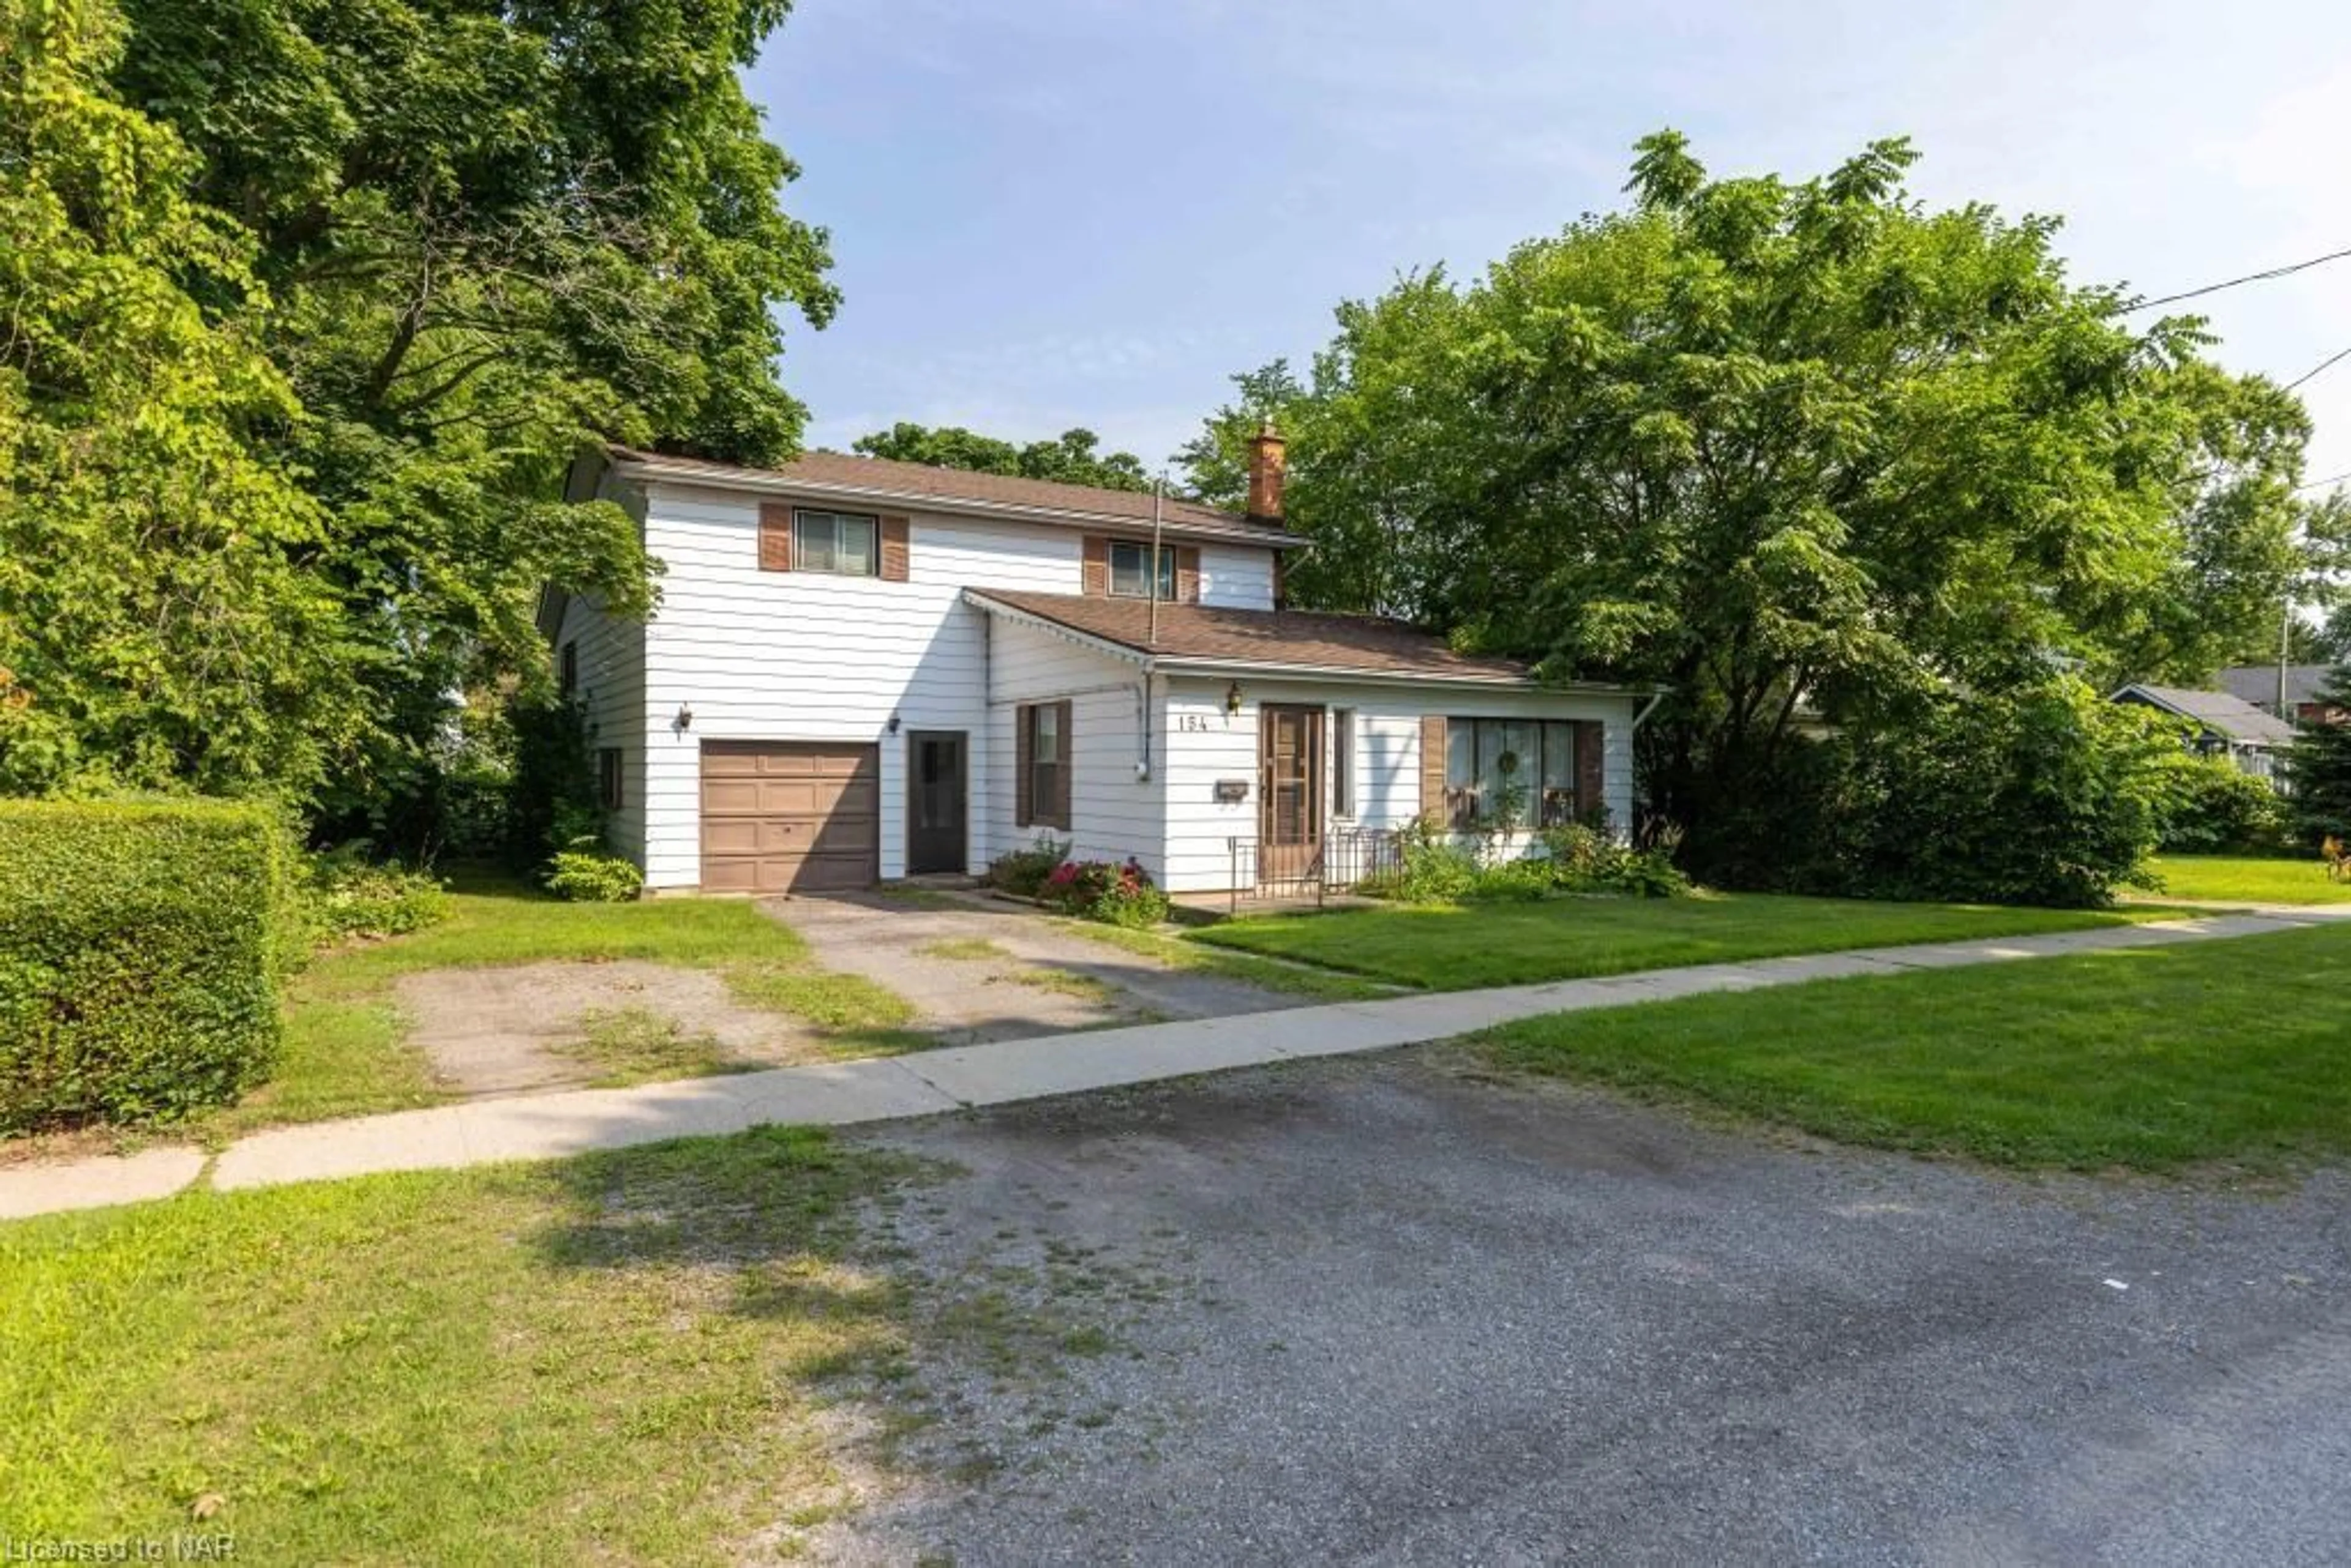 Frontside or backside of a home for 154 Dalhousie Ave, St. Catharines Ontario L2N 4X7